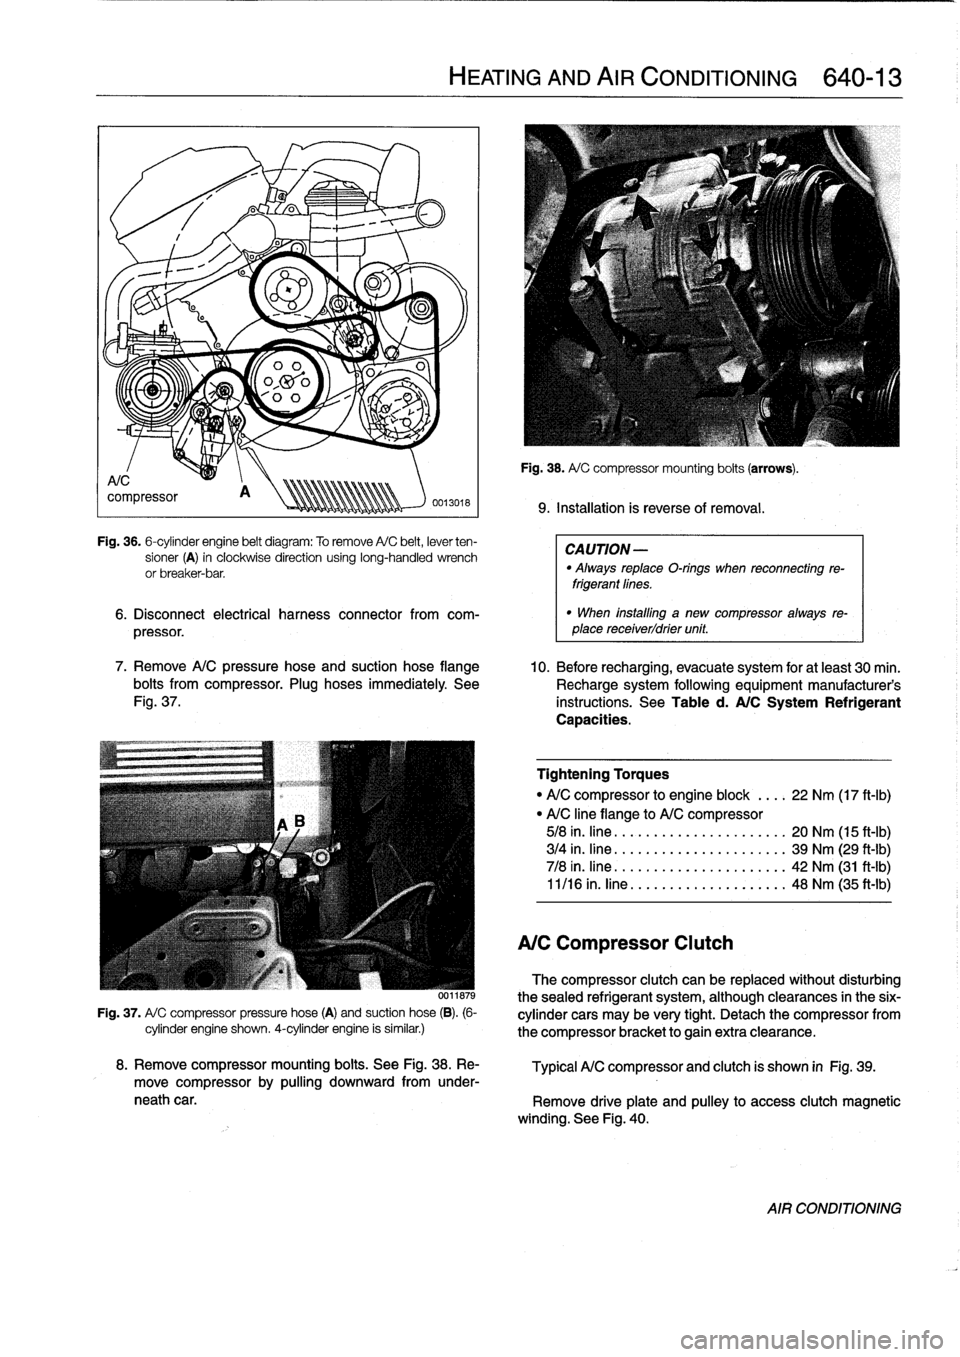 BMW 318i 1998 E36 Service Manual 
Fig
.
36
.
6-cylinder
engine
belt
diagram
:
To
remove
A/C
belt,
lever
ten-
sioner
(A)
in
clockwise
direction
using
long-handled
wrench
or
breaker-bar
.

6
.
Disconnect
electrical
harness
connector
fr